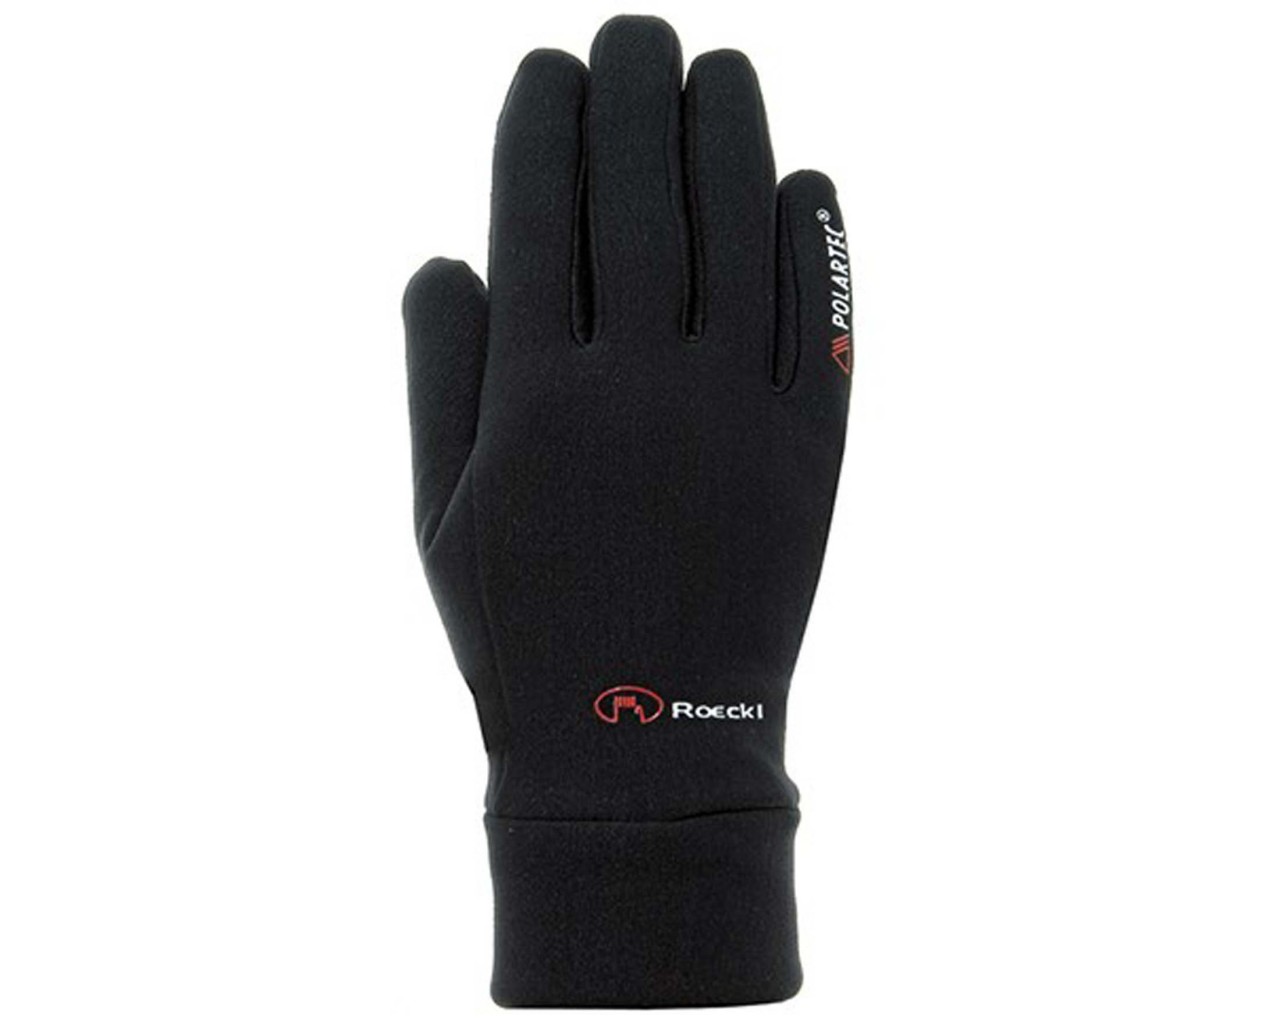 Roeckl Pino Gloves long fingers | black